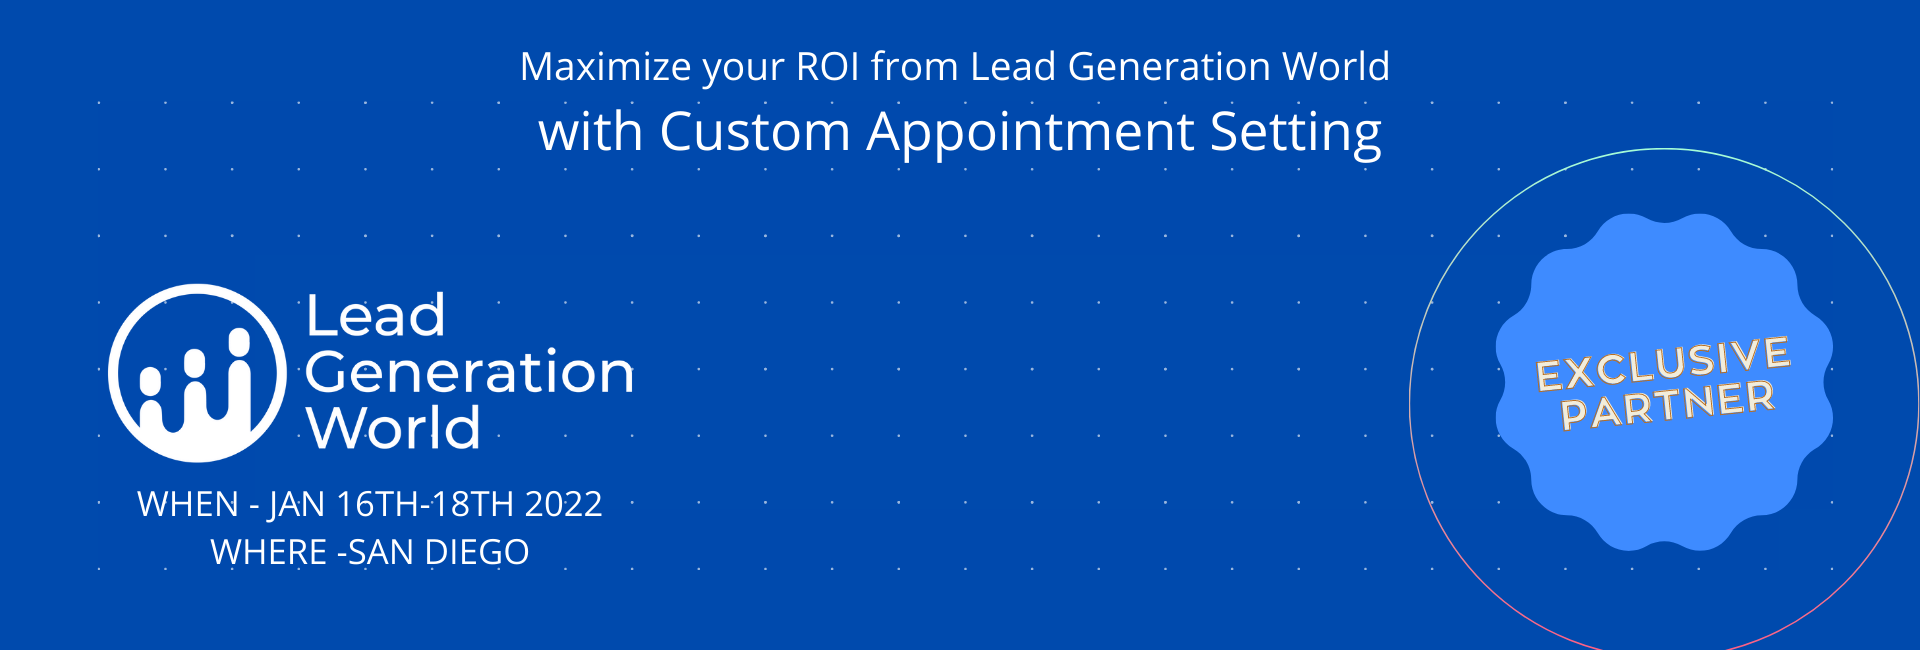 Maximize your ROI from Lead Generation World with Custom Appointment Setting (1)